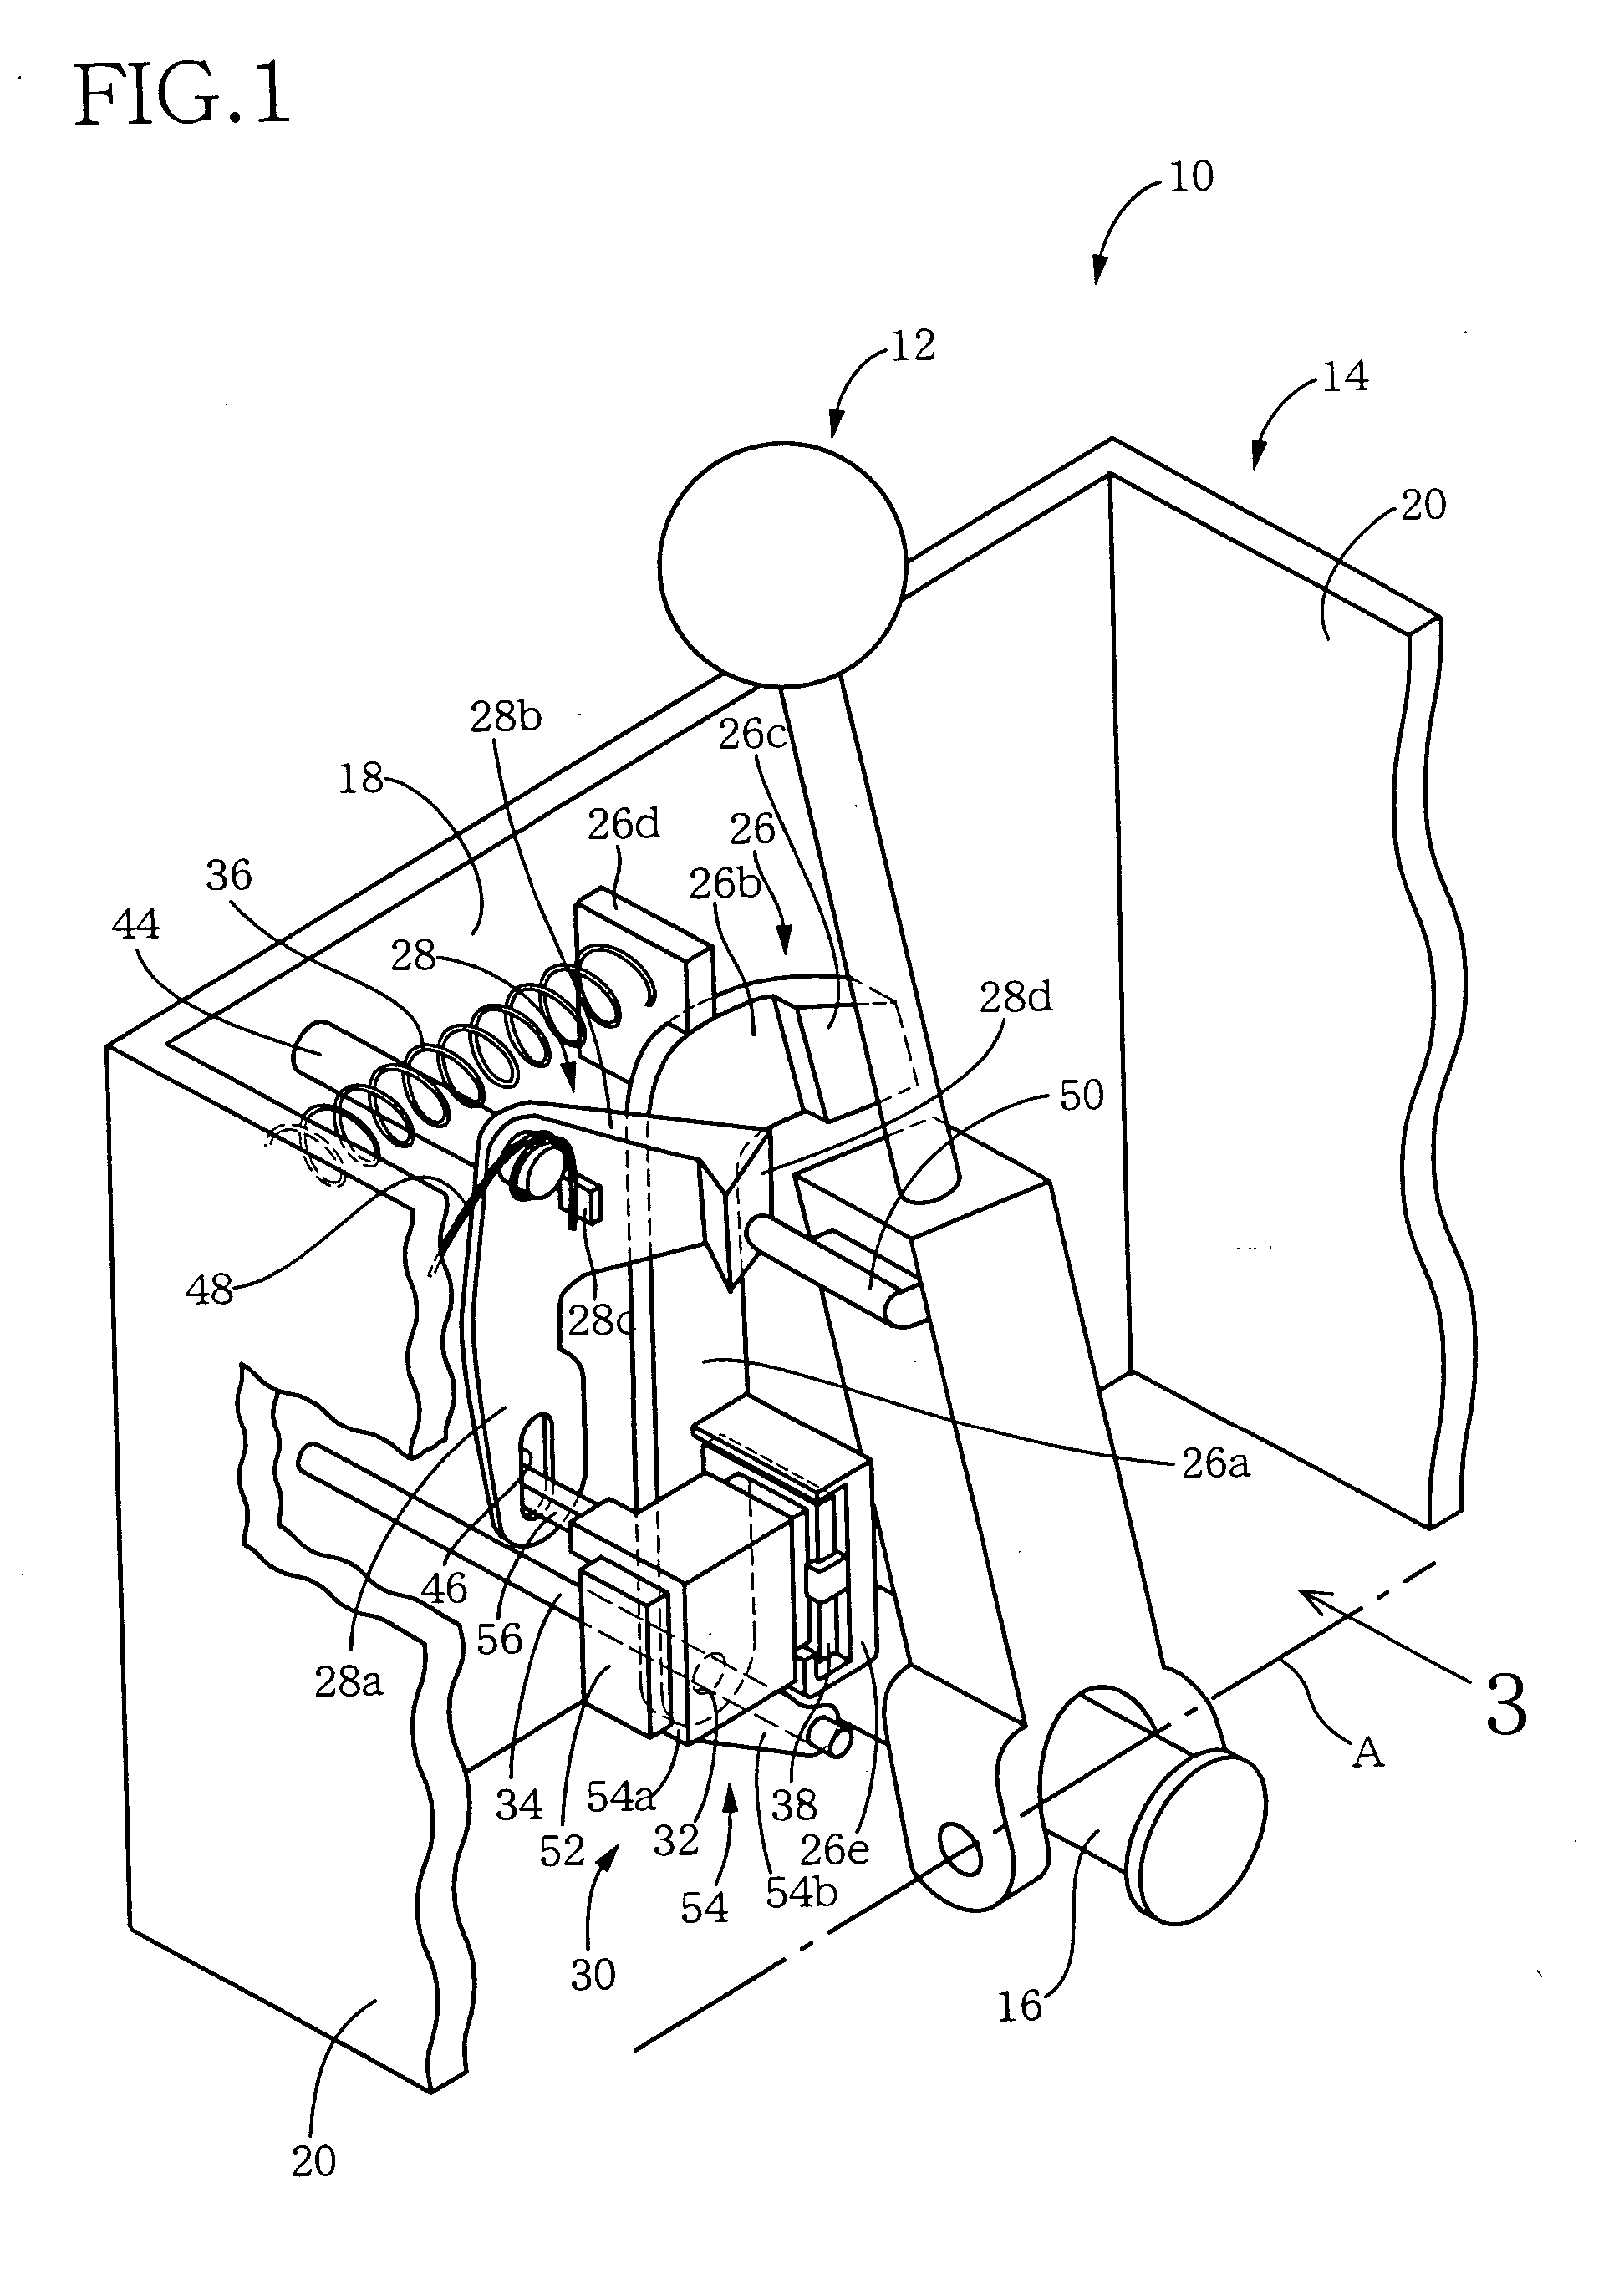 Vehicular shift lock device having pivotal stopper and linkage devices